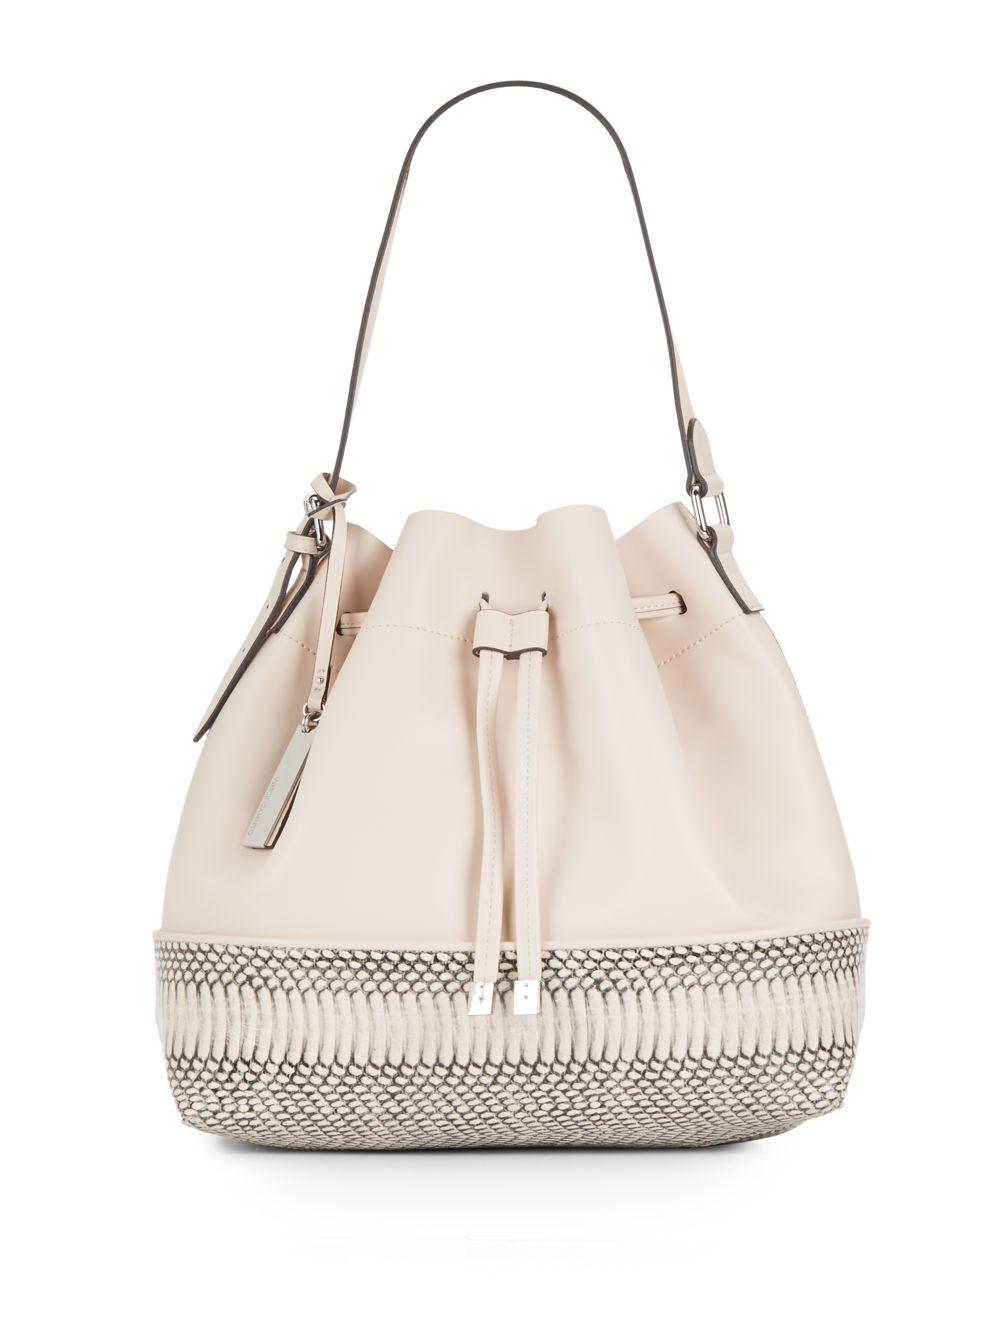 Vince camuto Leila Leather Bucket Bag in White | Lyst